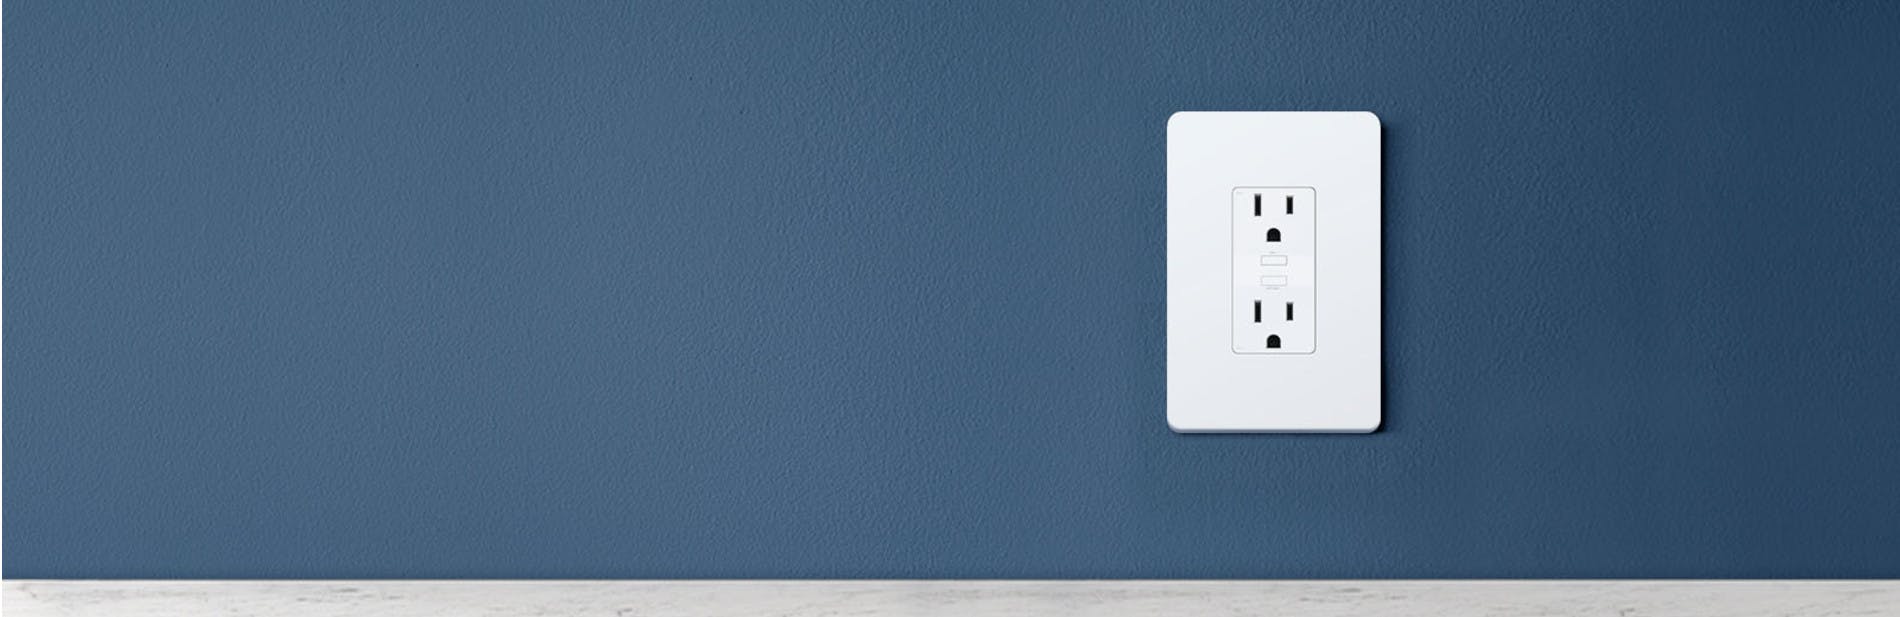 SIMPLE TOUCH Indoor WiFi Smart Plug with Single Grounded Outlet